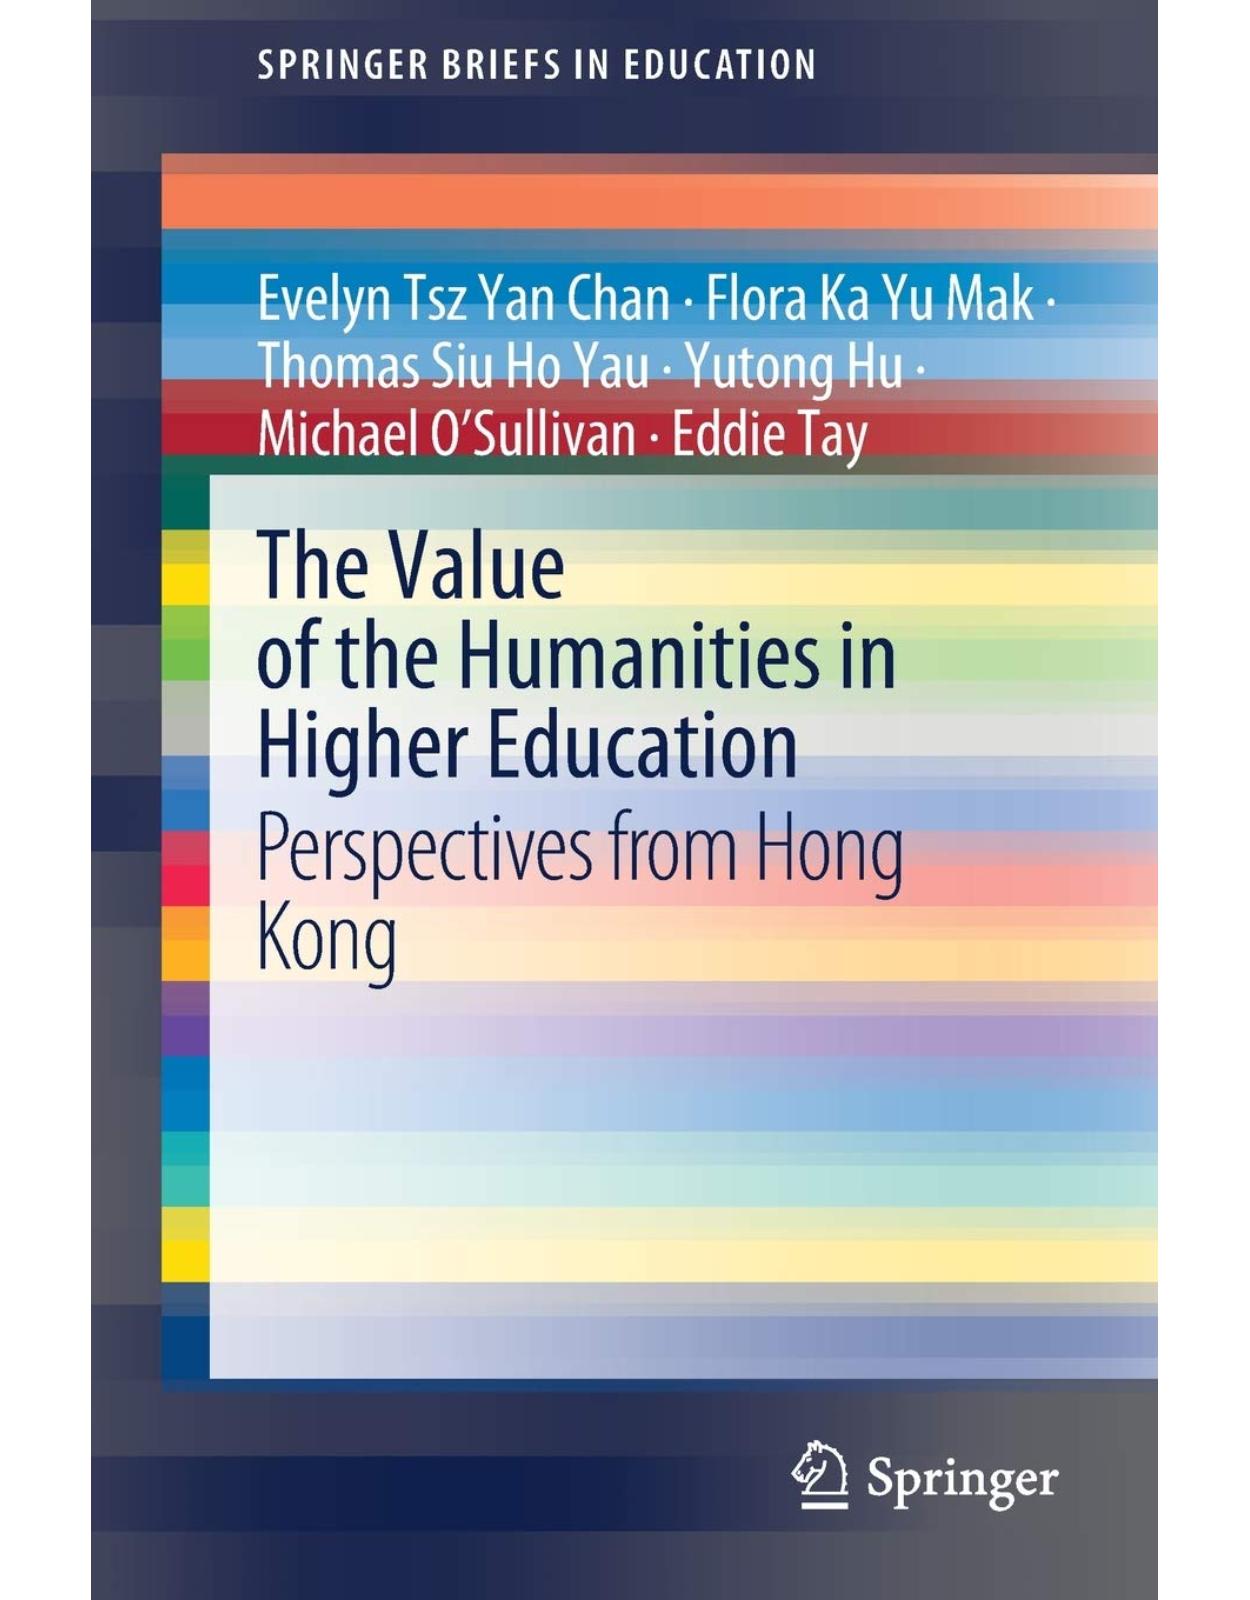 The Value of the Humanities in Higher Education: Perspectives from Hong Kong (SpringerBriefs in Education) 